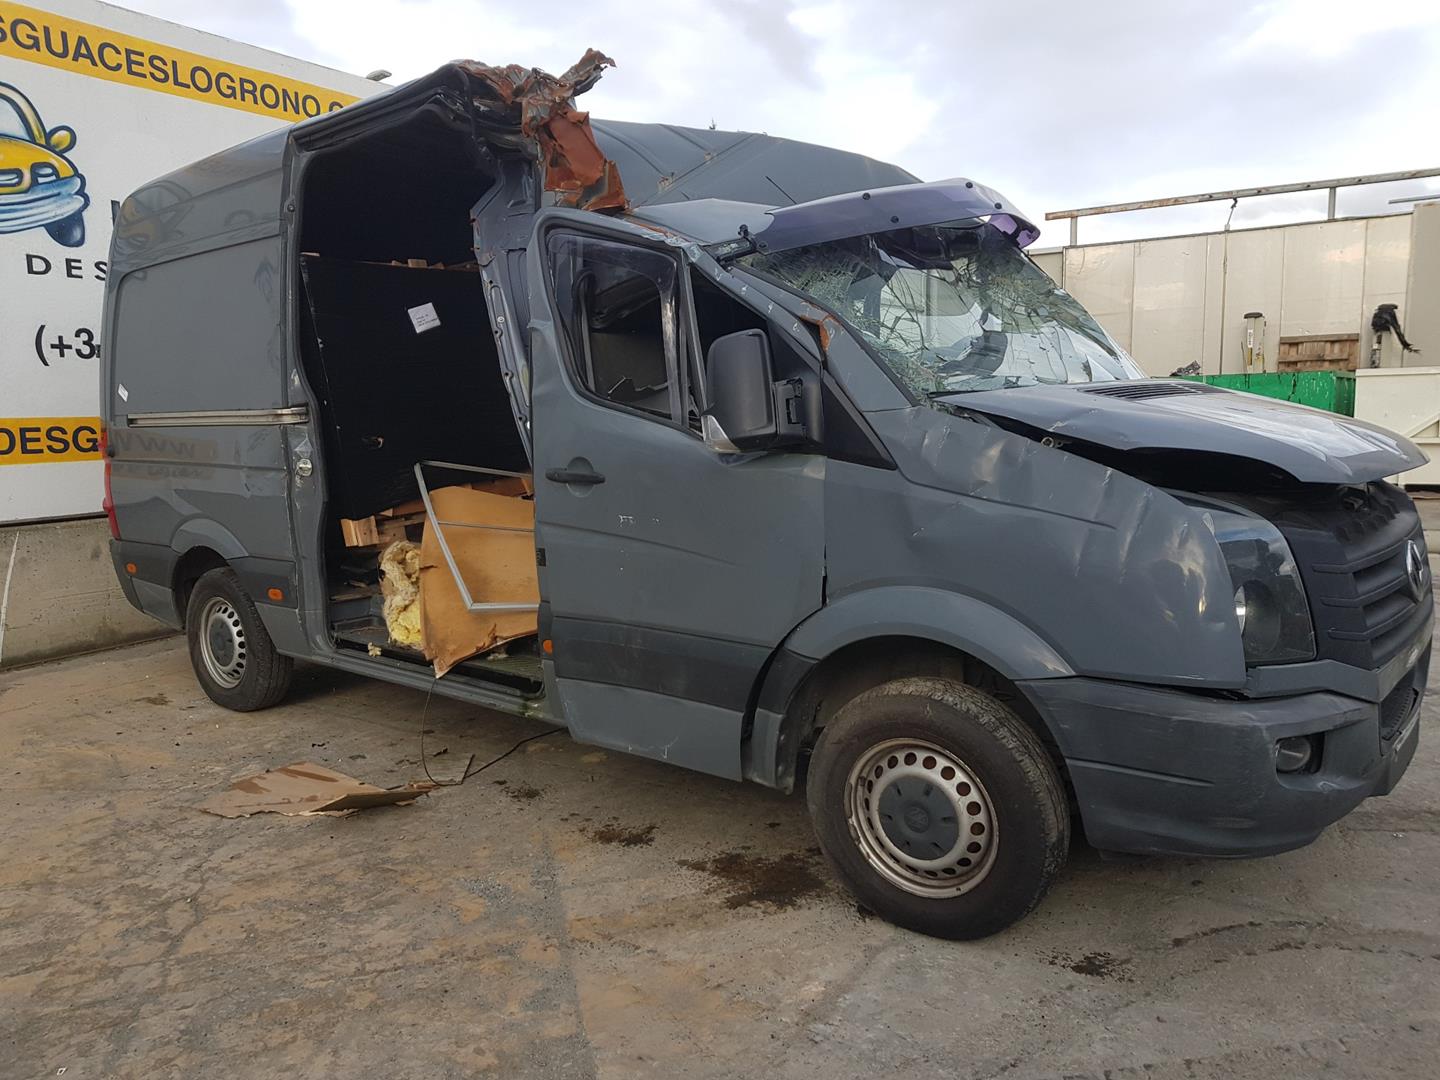 VOLKSWAGEN Crafter 1 generation (2006-2016) Водяной насос A2118350364, A2118350364 24228450